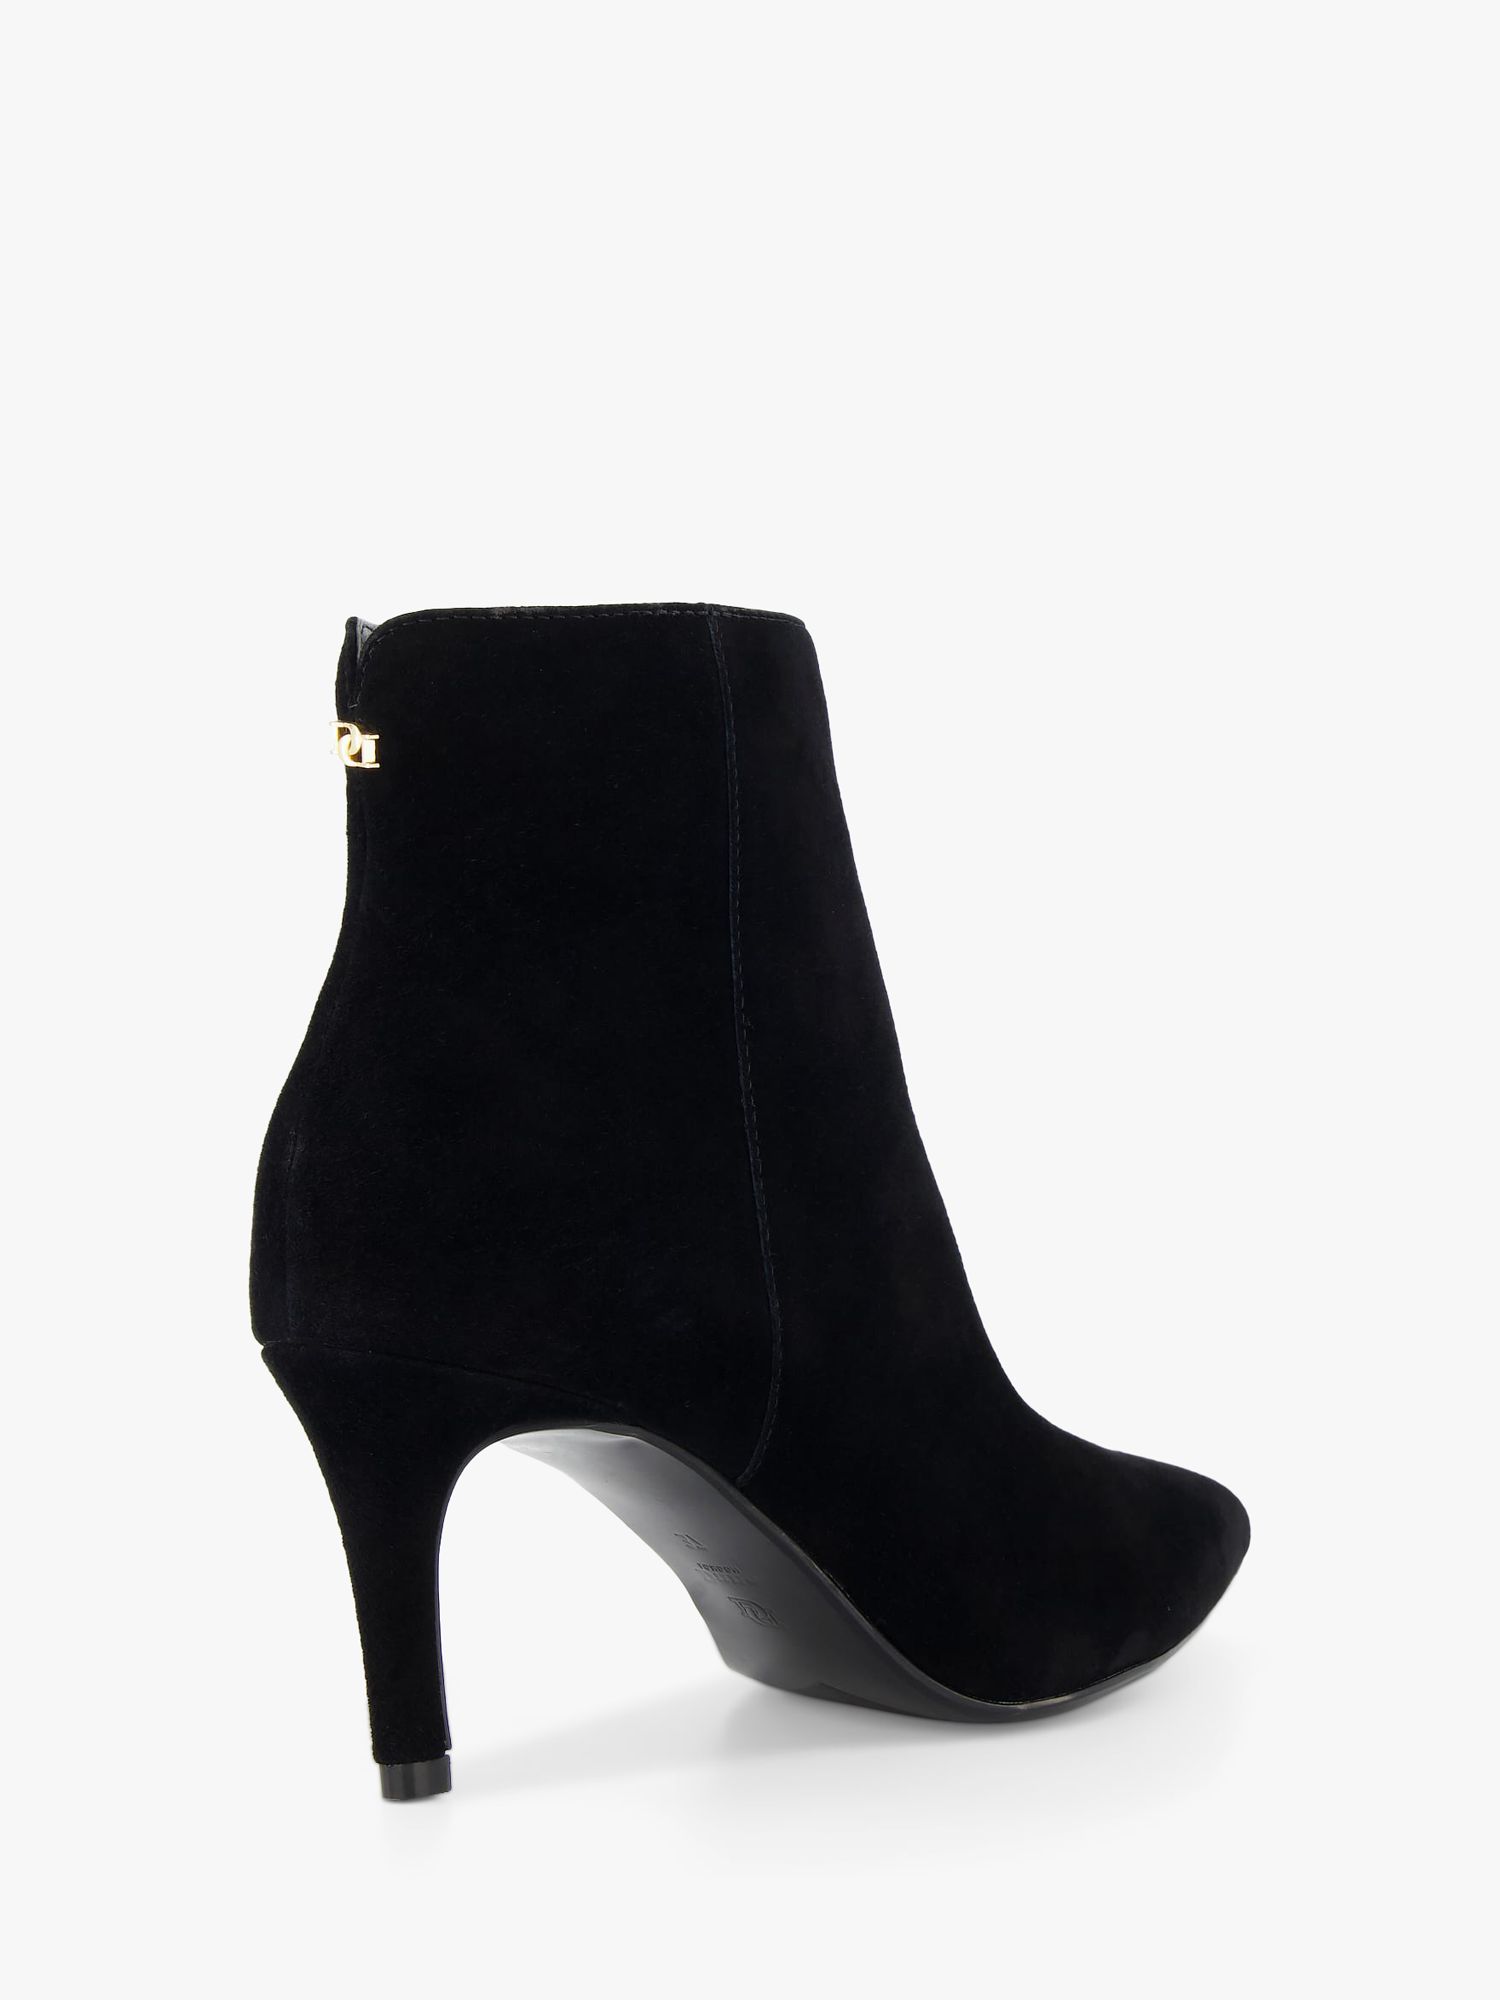 Dune Obsessive2 Suede Pointed Toe Ankle Boots, Black at John Lewis ...